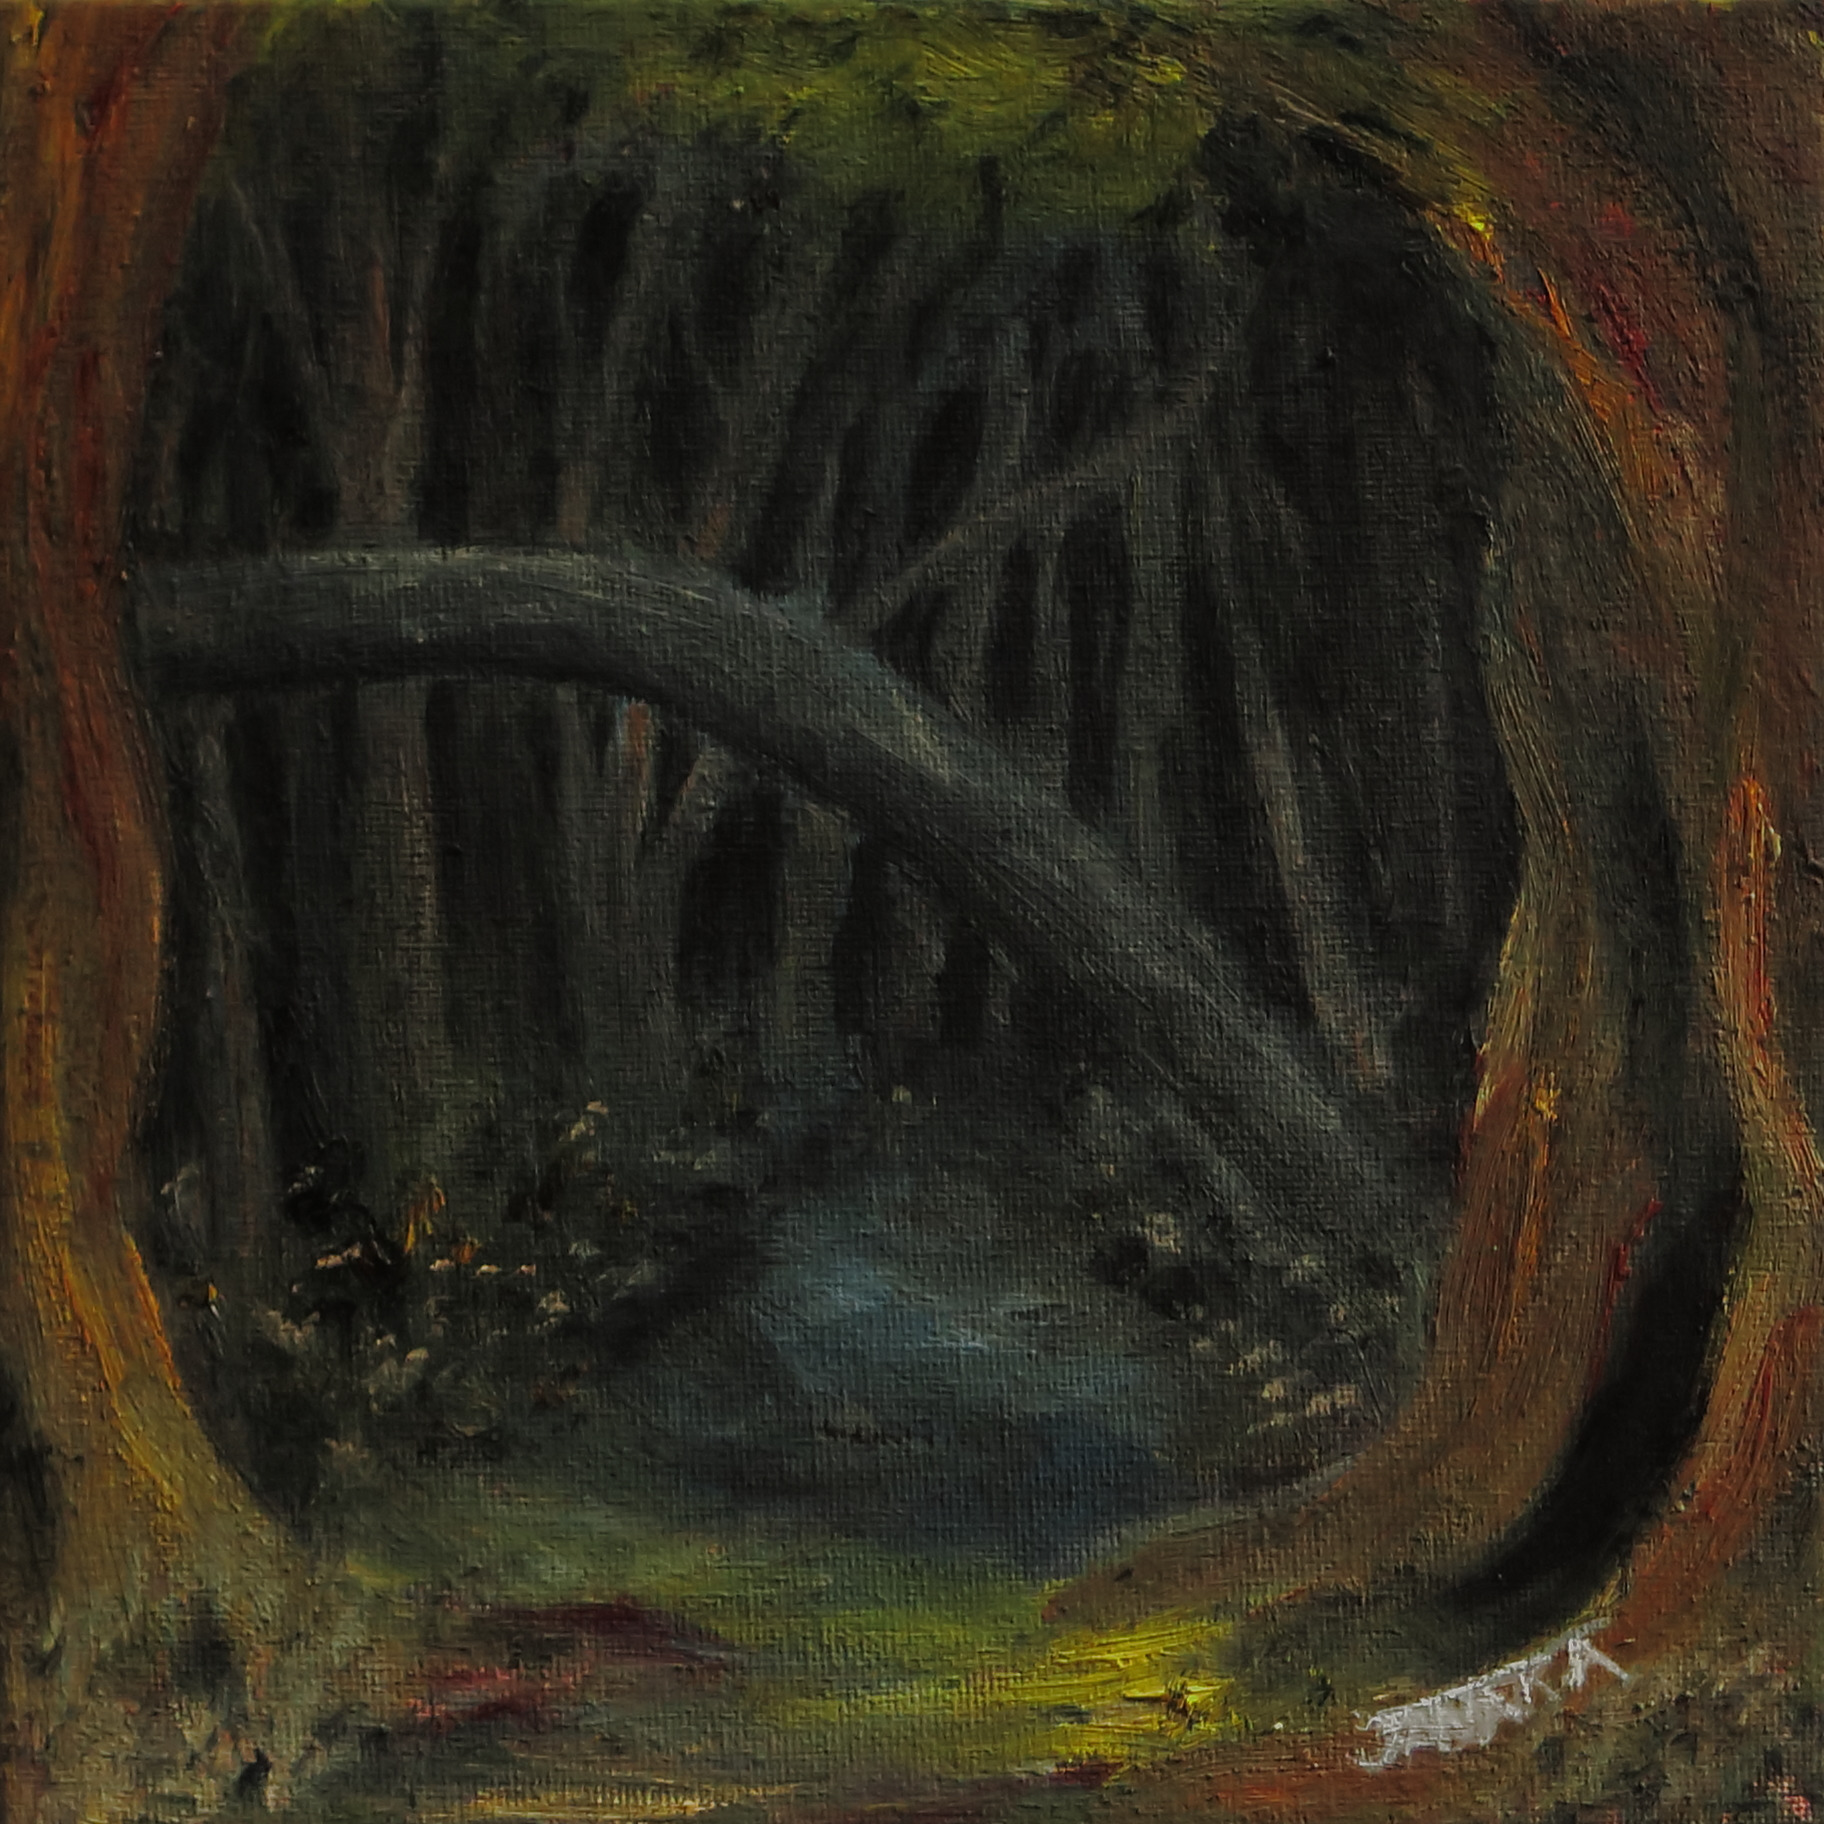 Upon the river trail8x8 hdj4gy